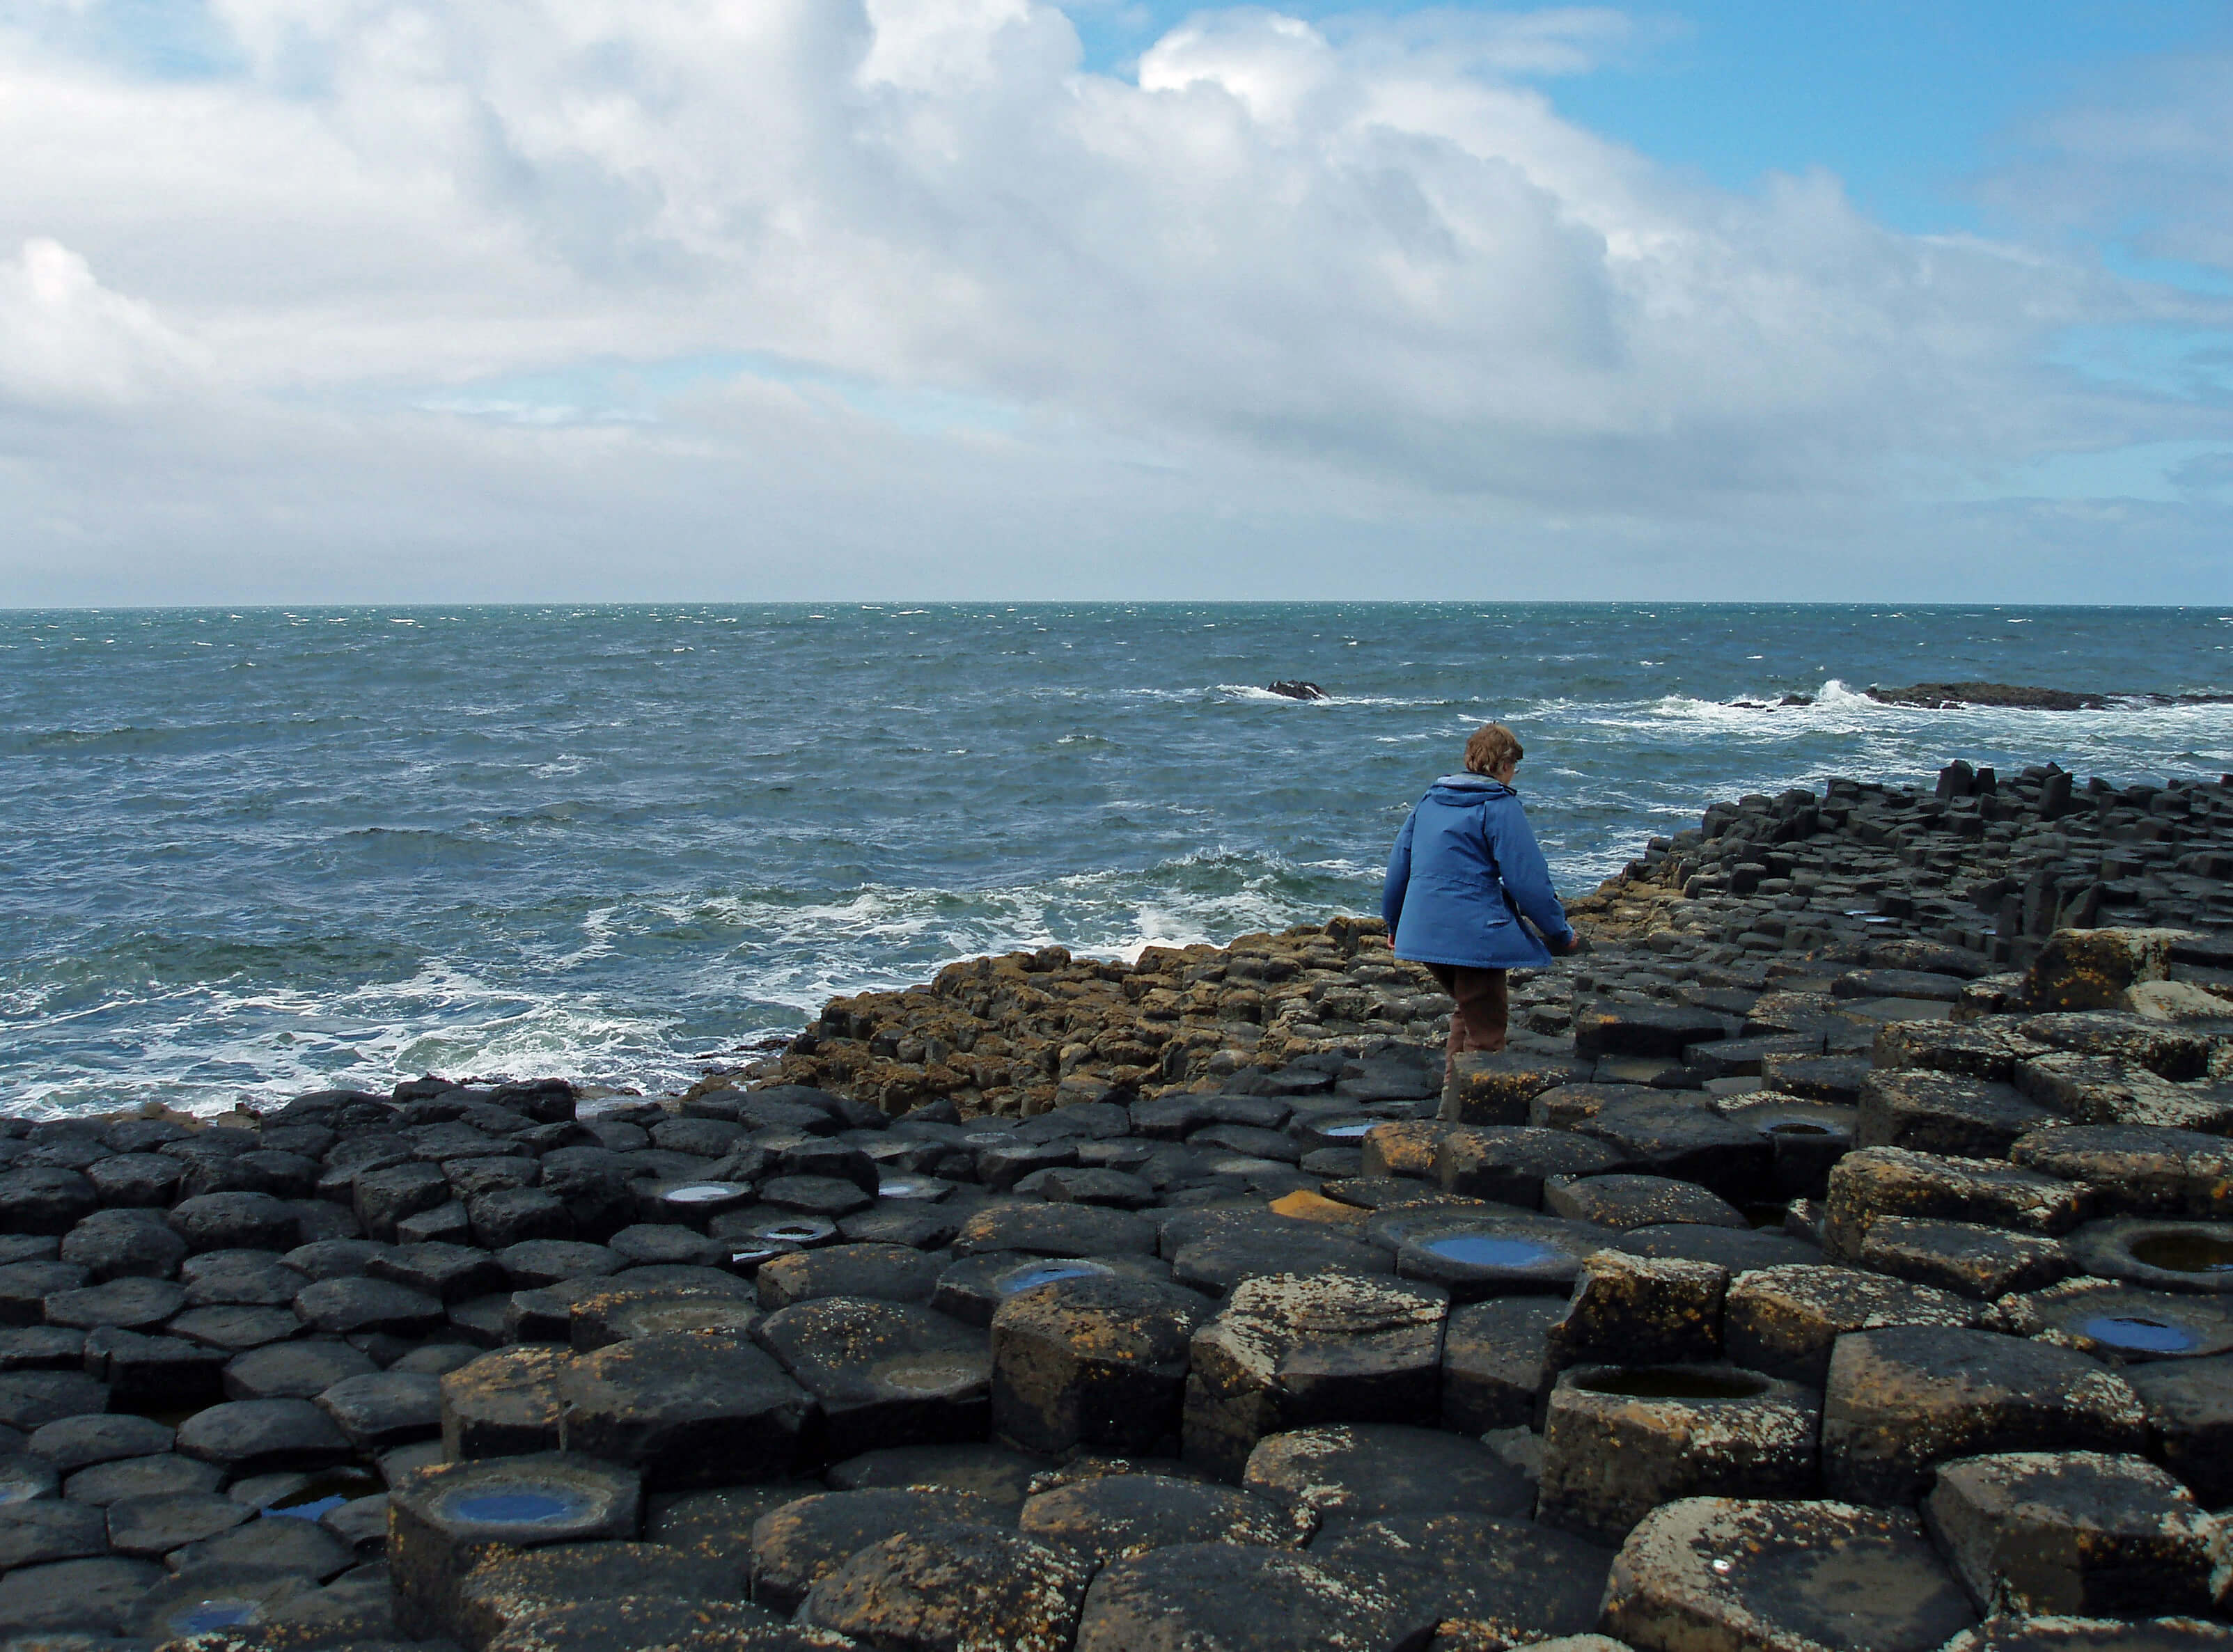 The Giant’s Causeway.